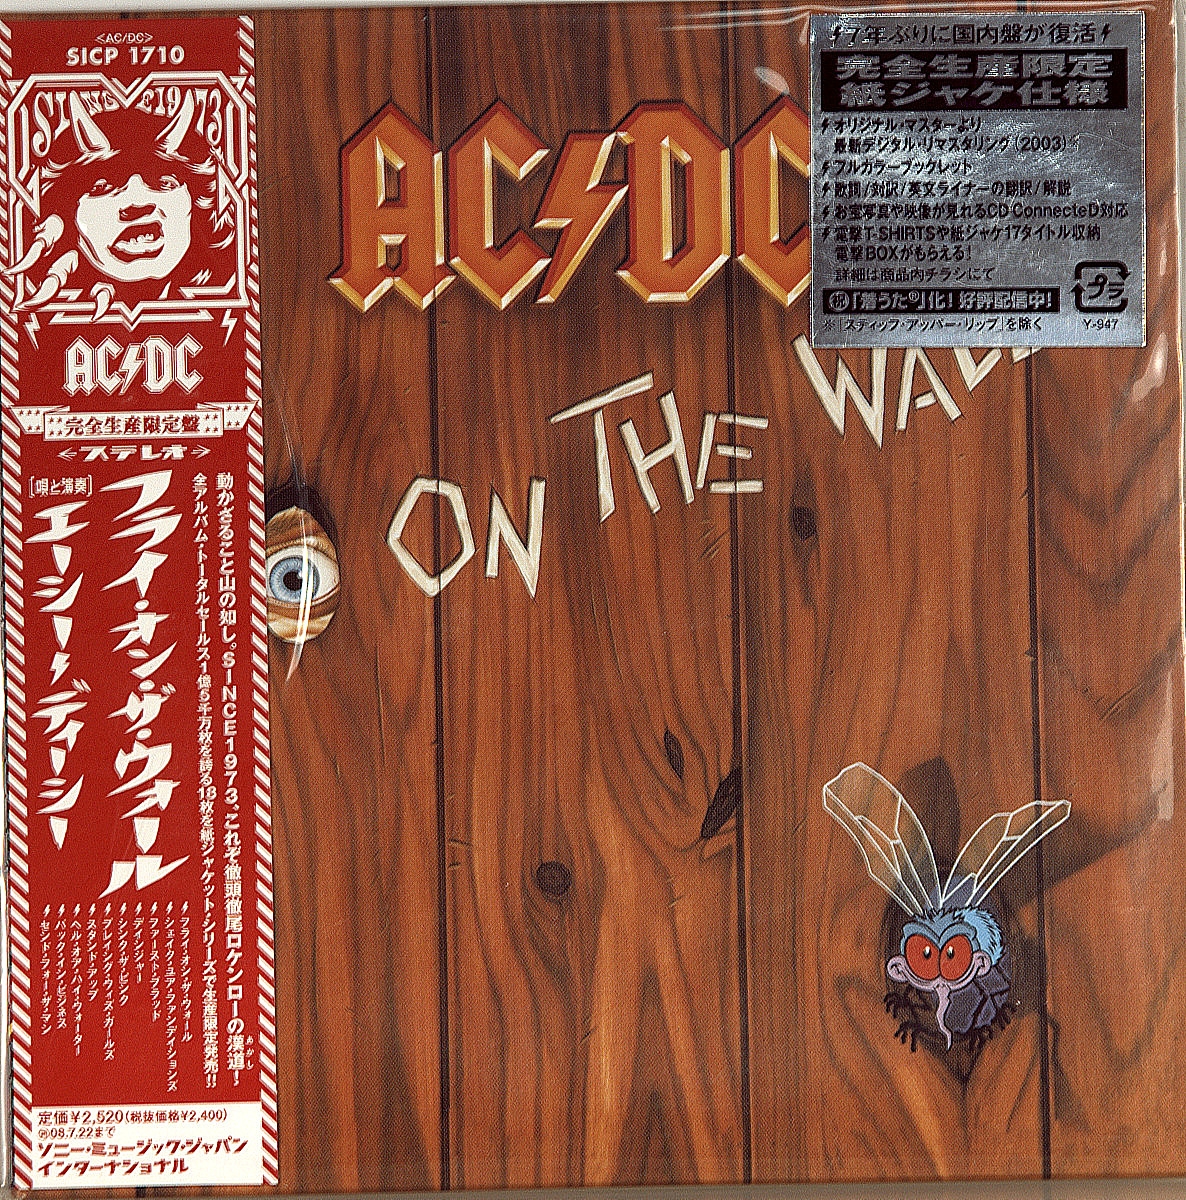 Gone flac. AC DC Fly on the Wall 1985. AC/DC: Fly on the Wall (CD). Fly on the Wall AC DC альбом. AC DC Fly on the Wall обложка.